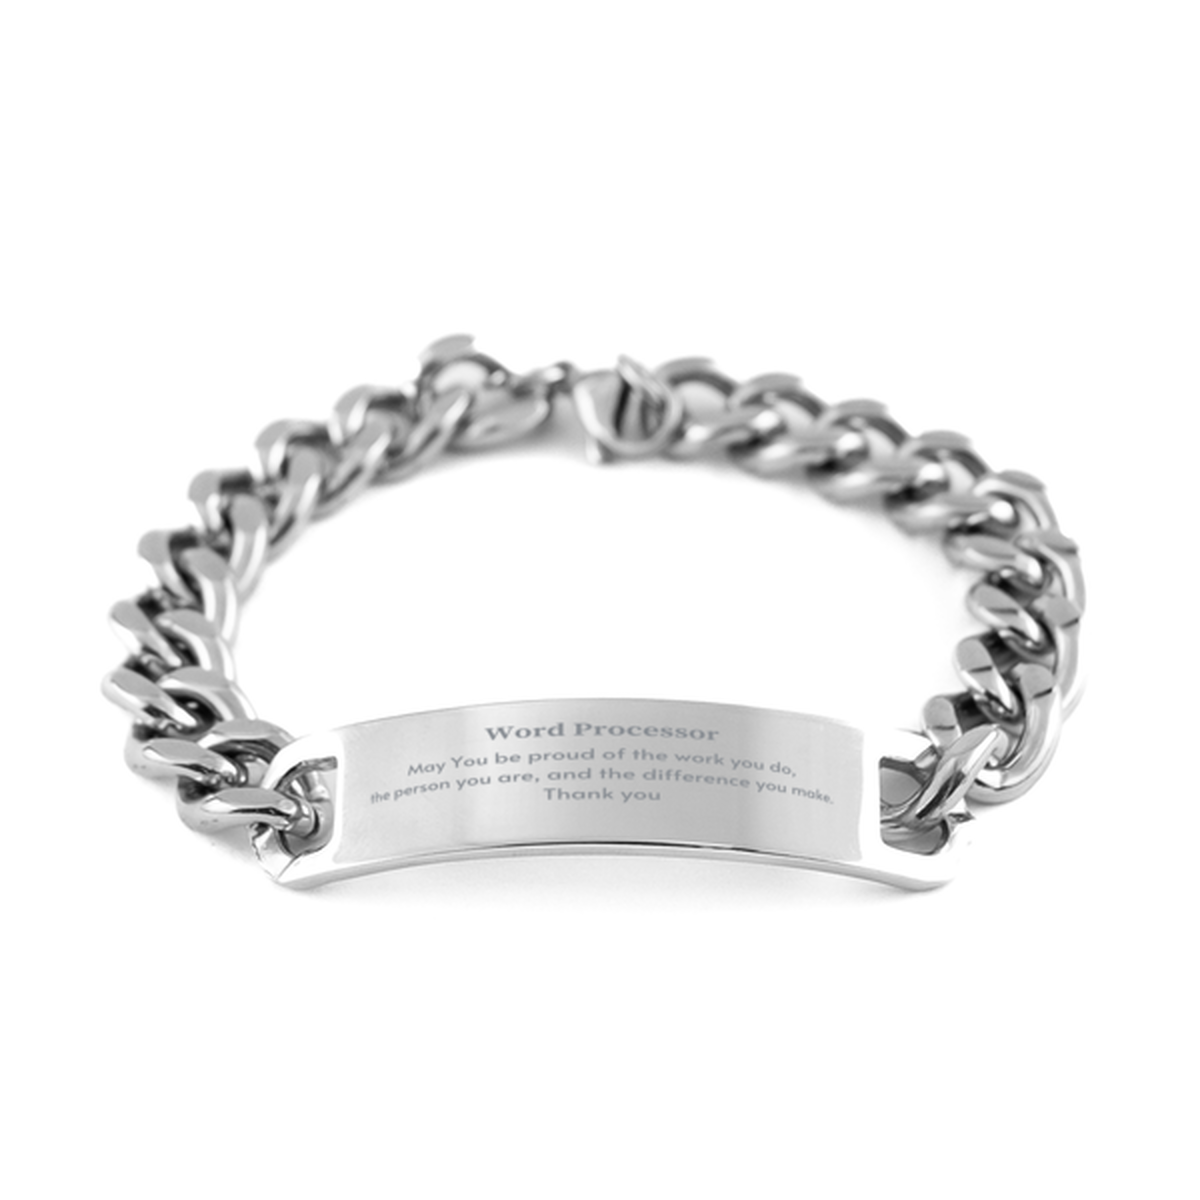 Heartwarming Cuban Chain Stainless Steel Bracelet Retirement Coworkers Gifts for Word Processor, Word Processor May You be proud of the work you do, the person you are Gifts for Boss Men Women Friends